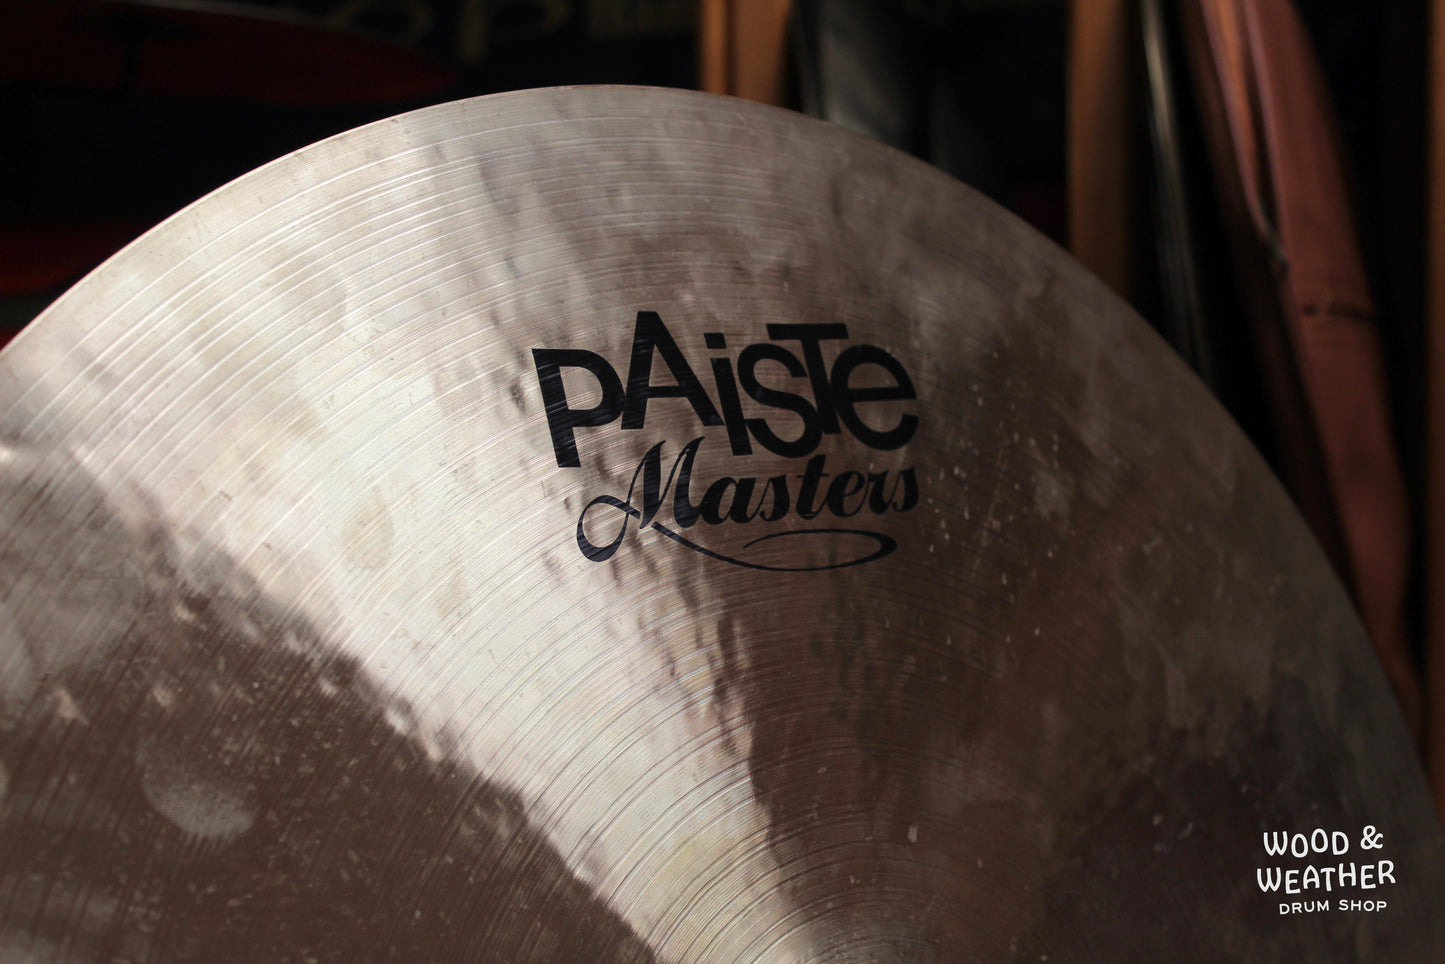 Used Paiste Masters Series 22" Thin Ride Cymbal 2124g